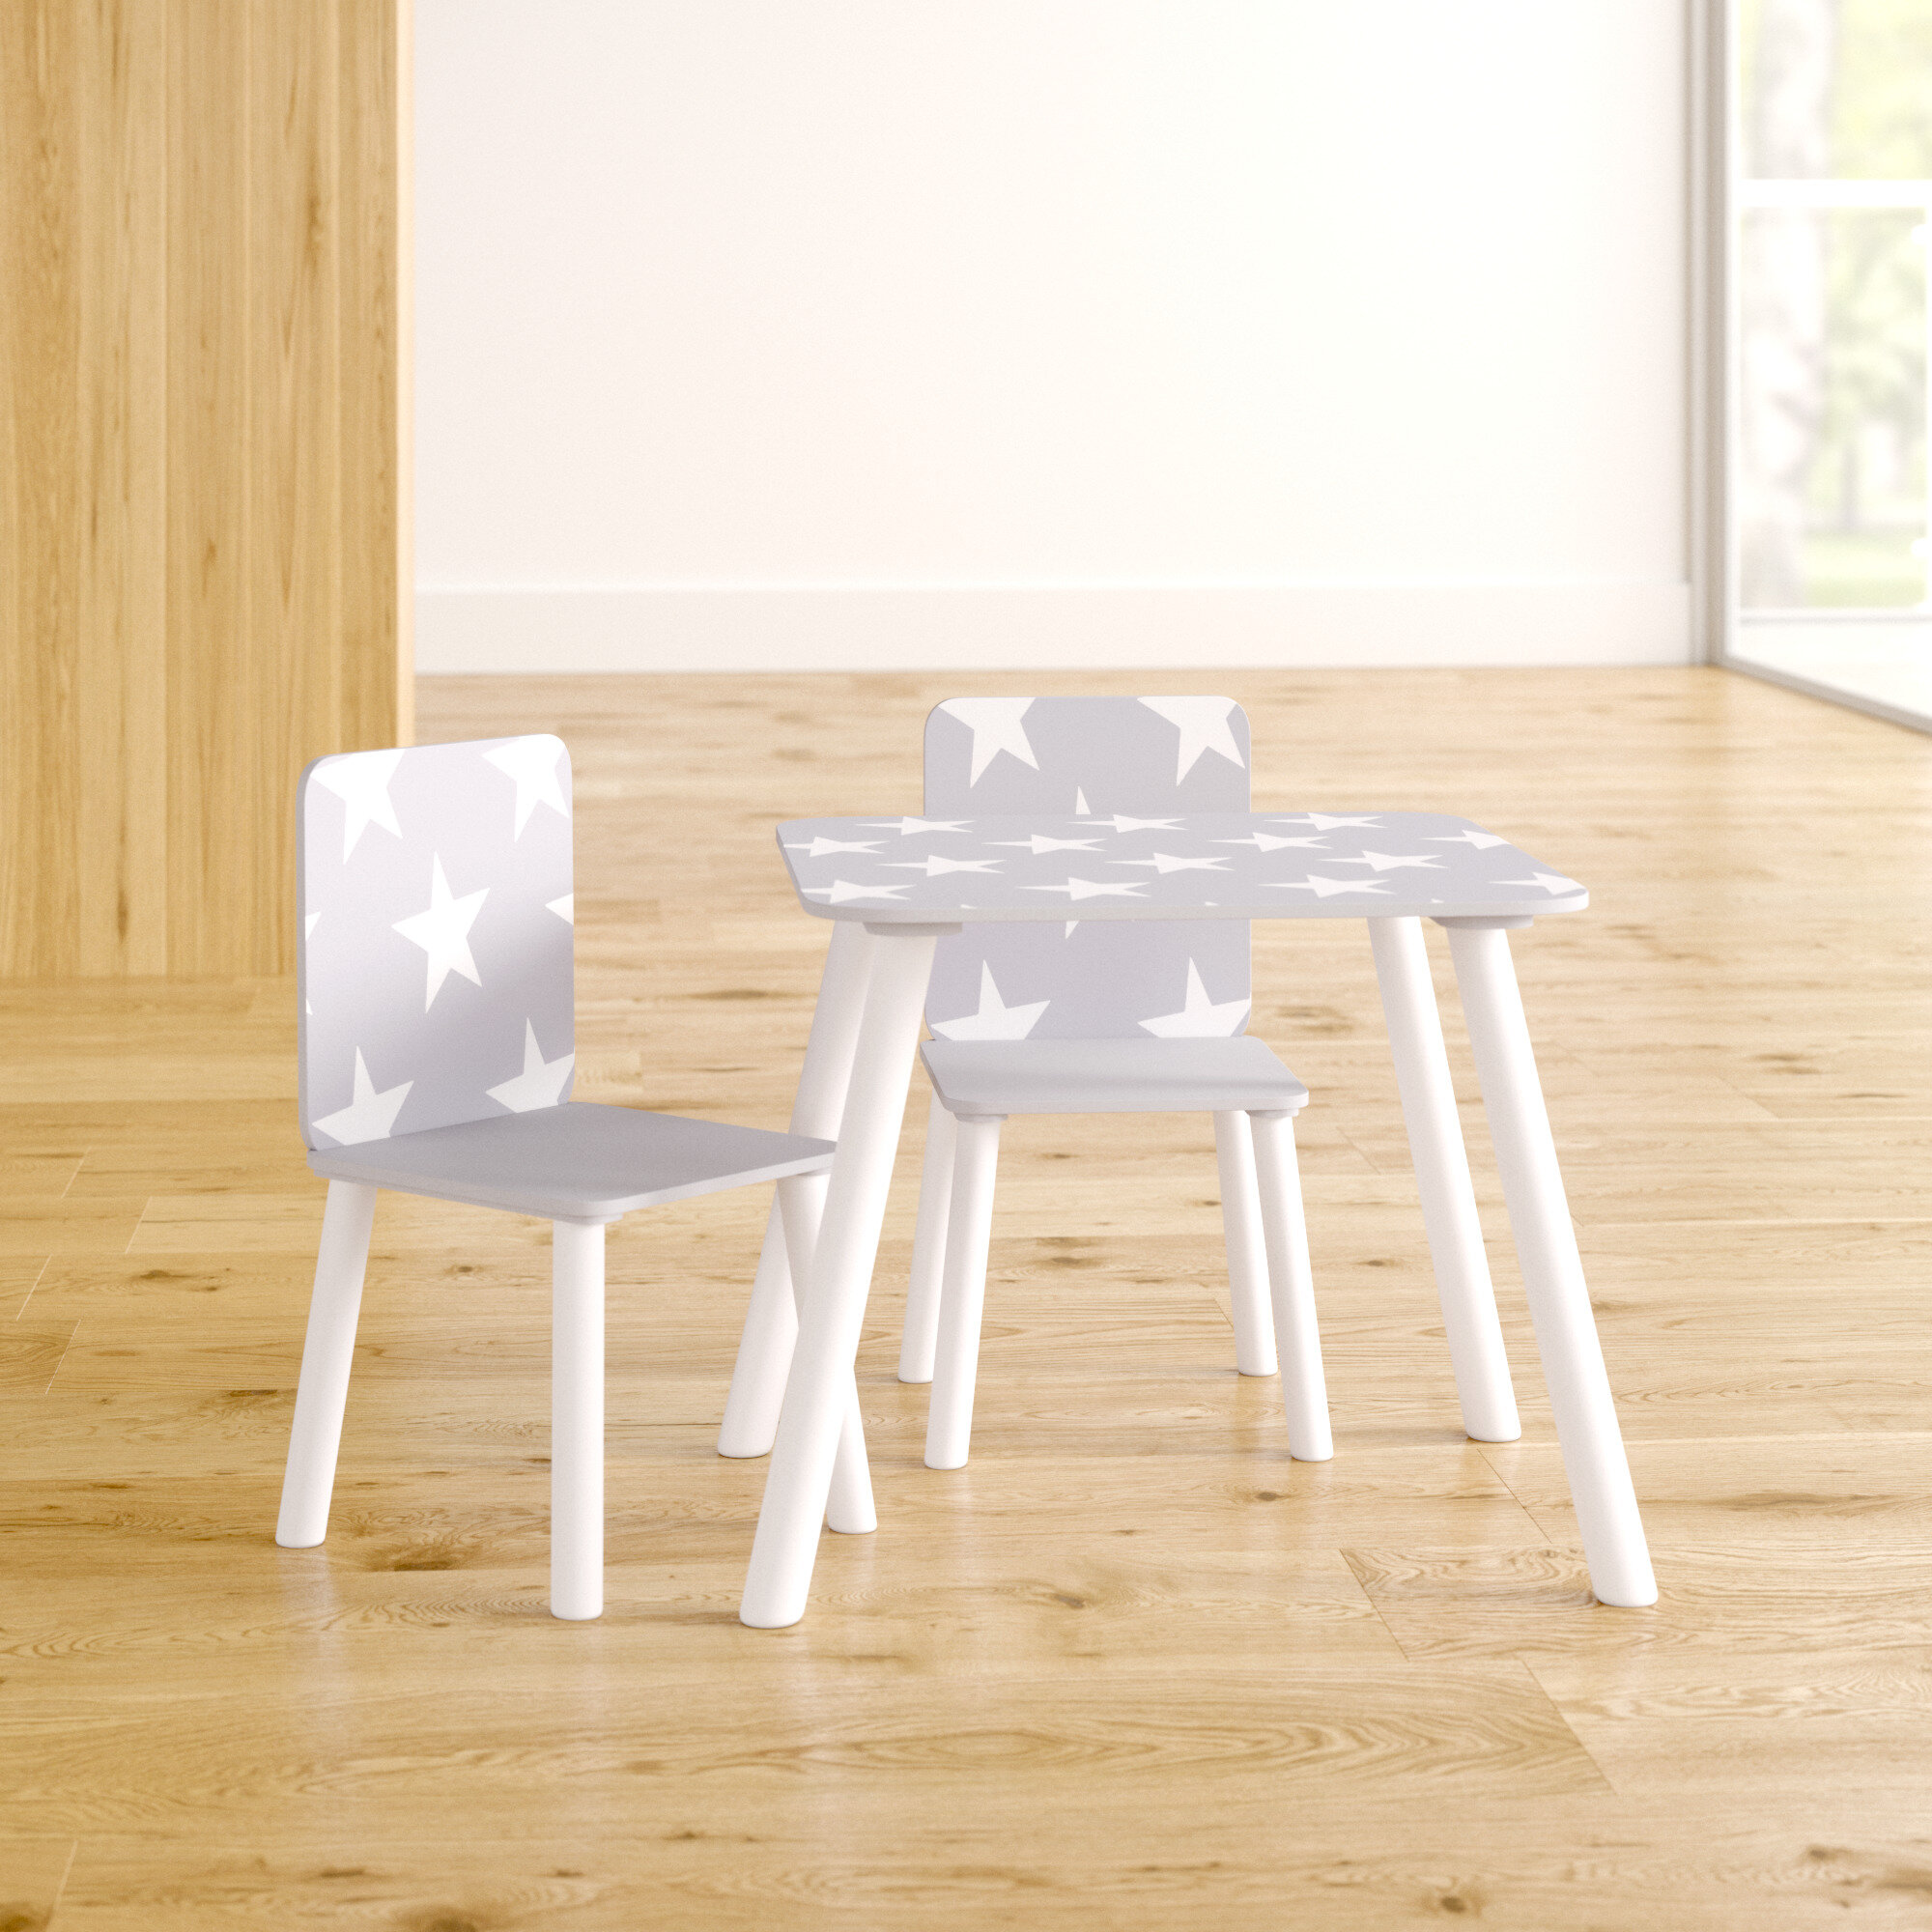 Isabelle Max Crow Childrens 3 Piece Writing Table And Chair Set Reviews Wayfaircouk